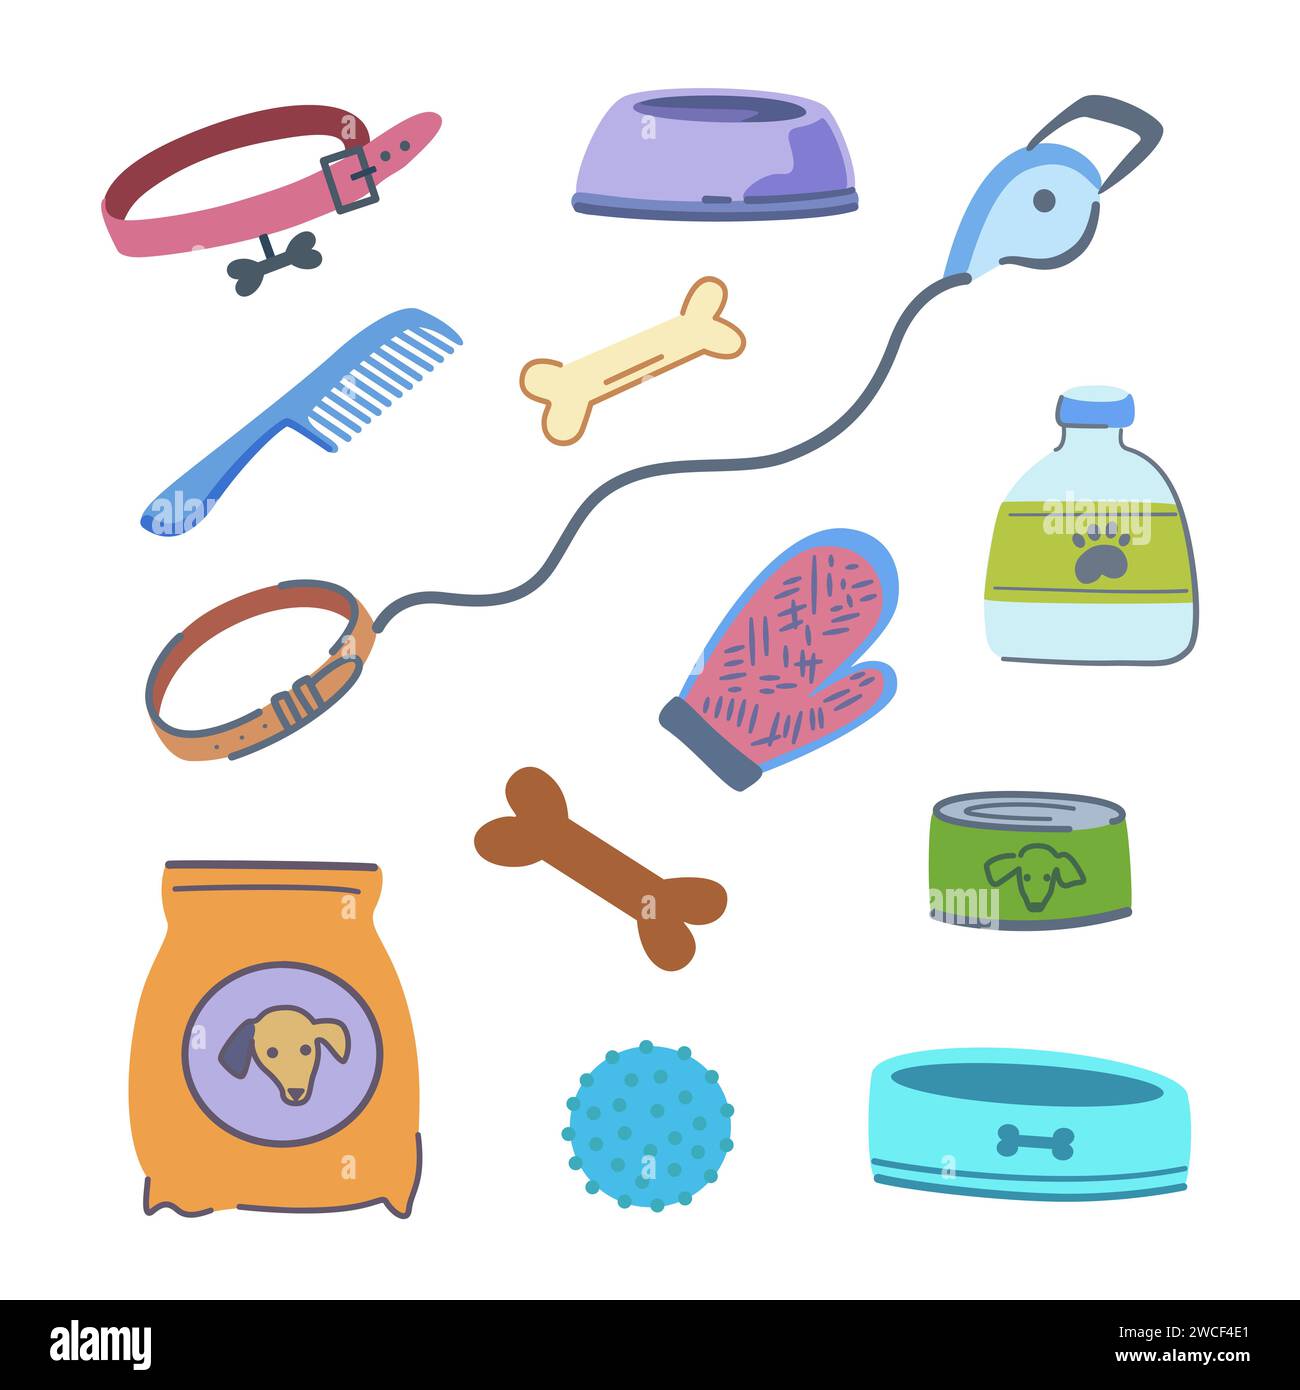 Set of pet supplies. Elements of dog grooming elements, food, toys, cages, beds. Vector illustration. Stock Vector